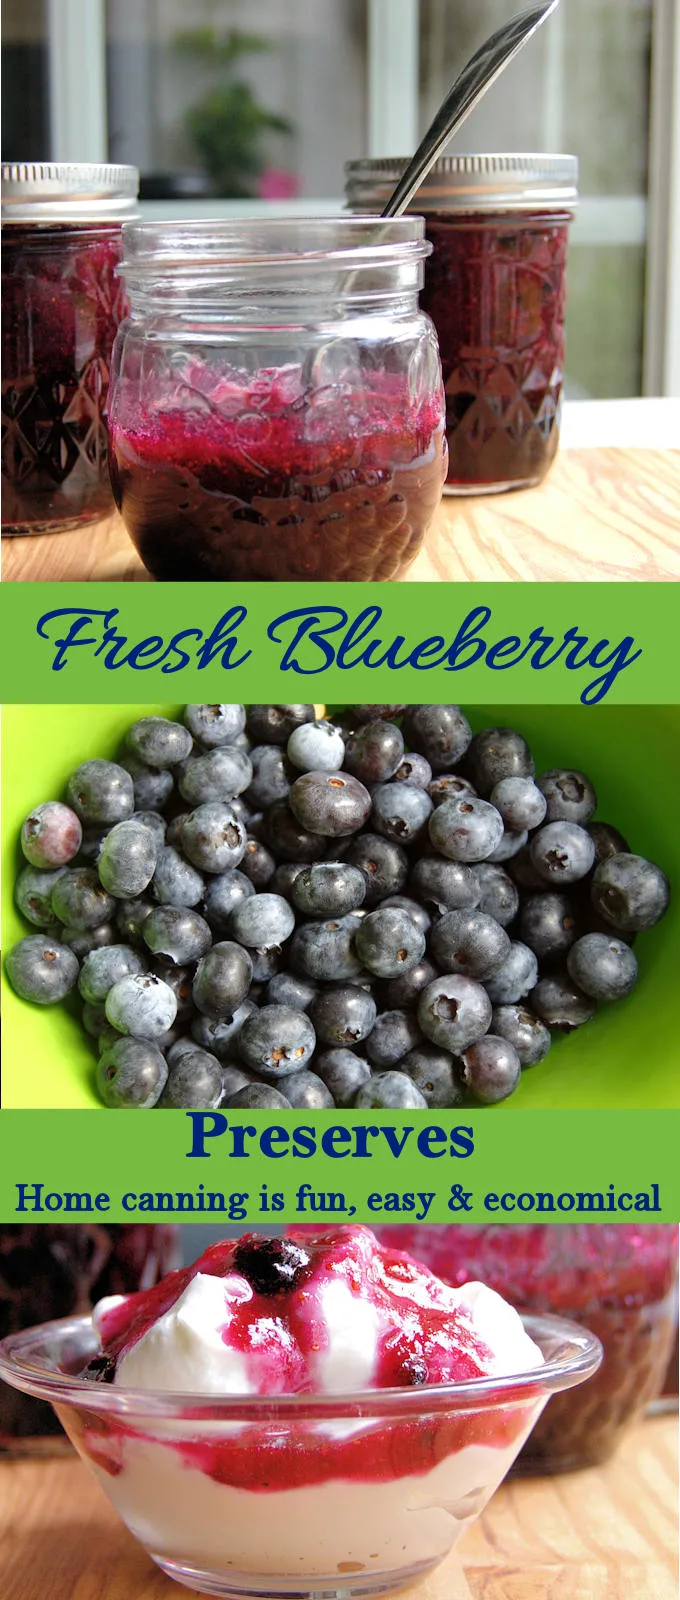 Make blueberry preserves in the summer while the berries are cheap and abundant. Enjoy the preserves all year.